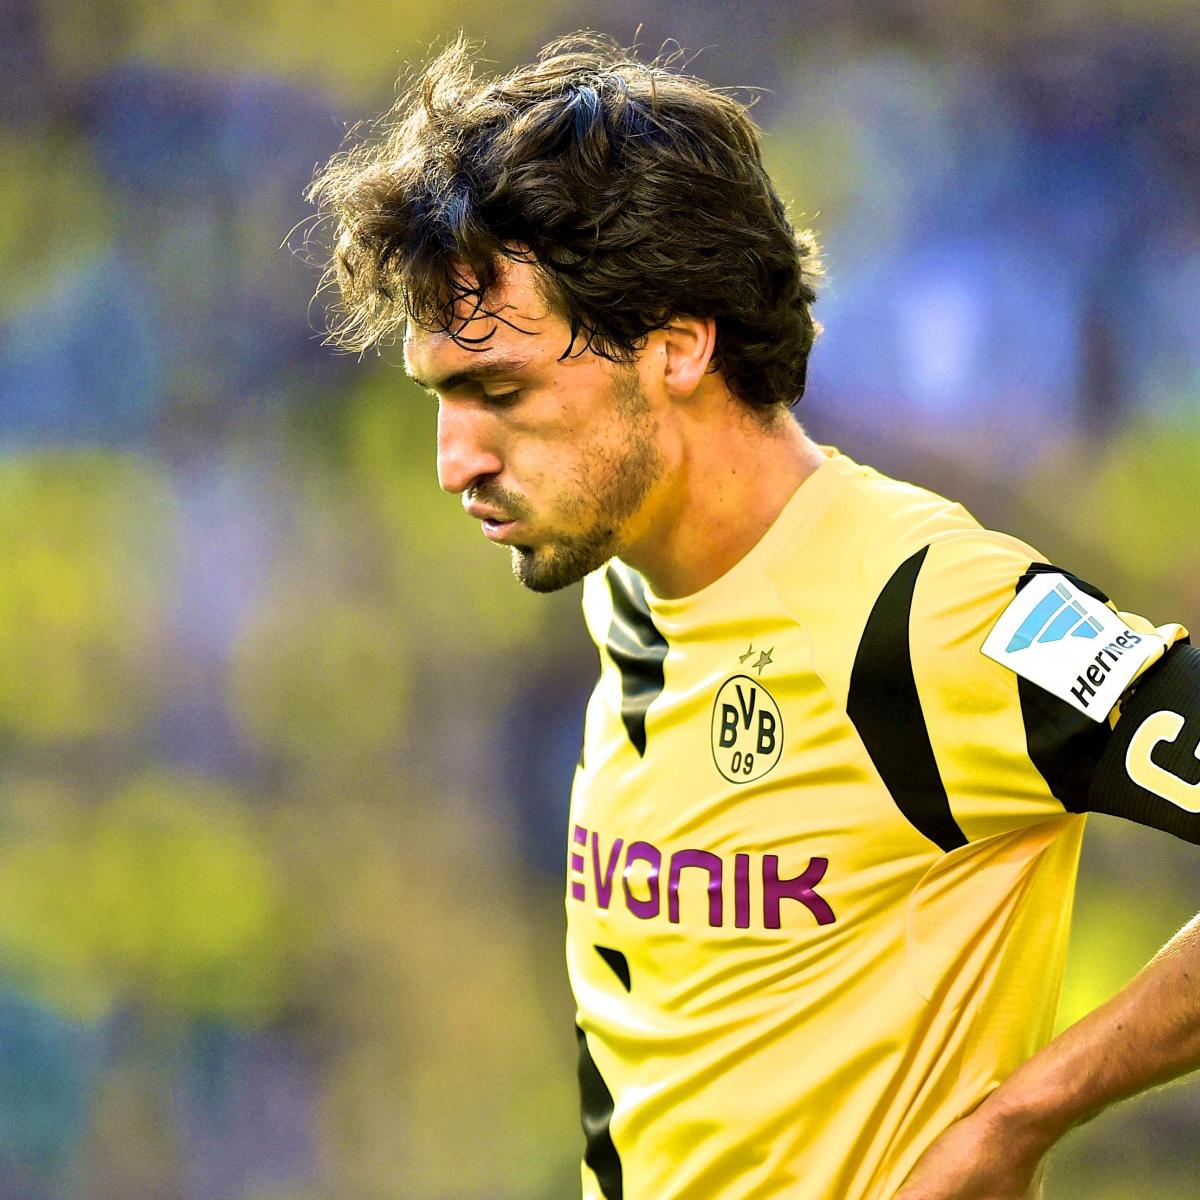 Mats Hummels Worth Record Fee for 'Desperate' Manchester United News